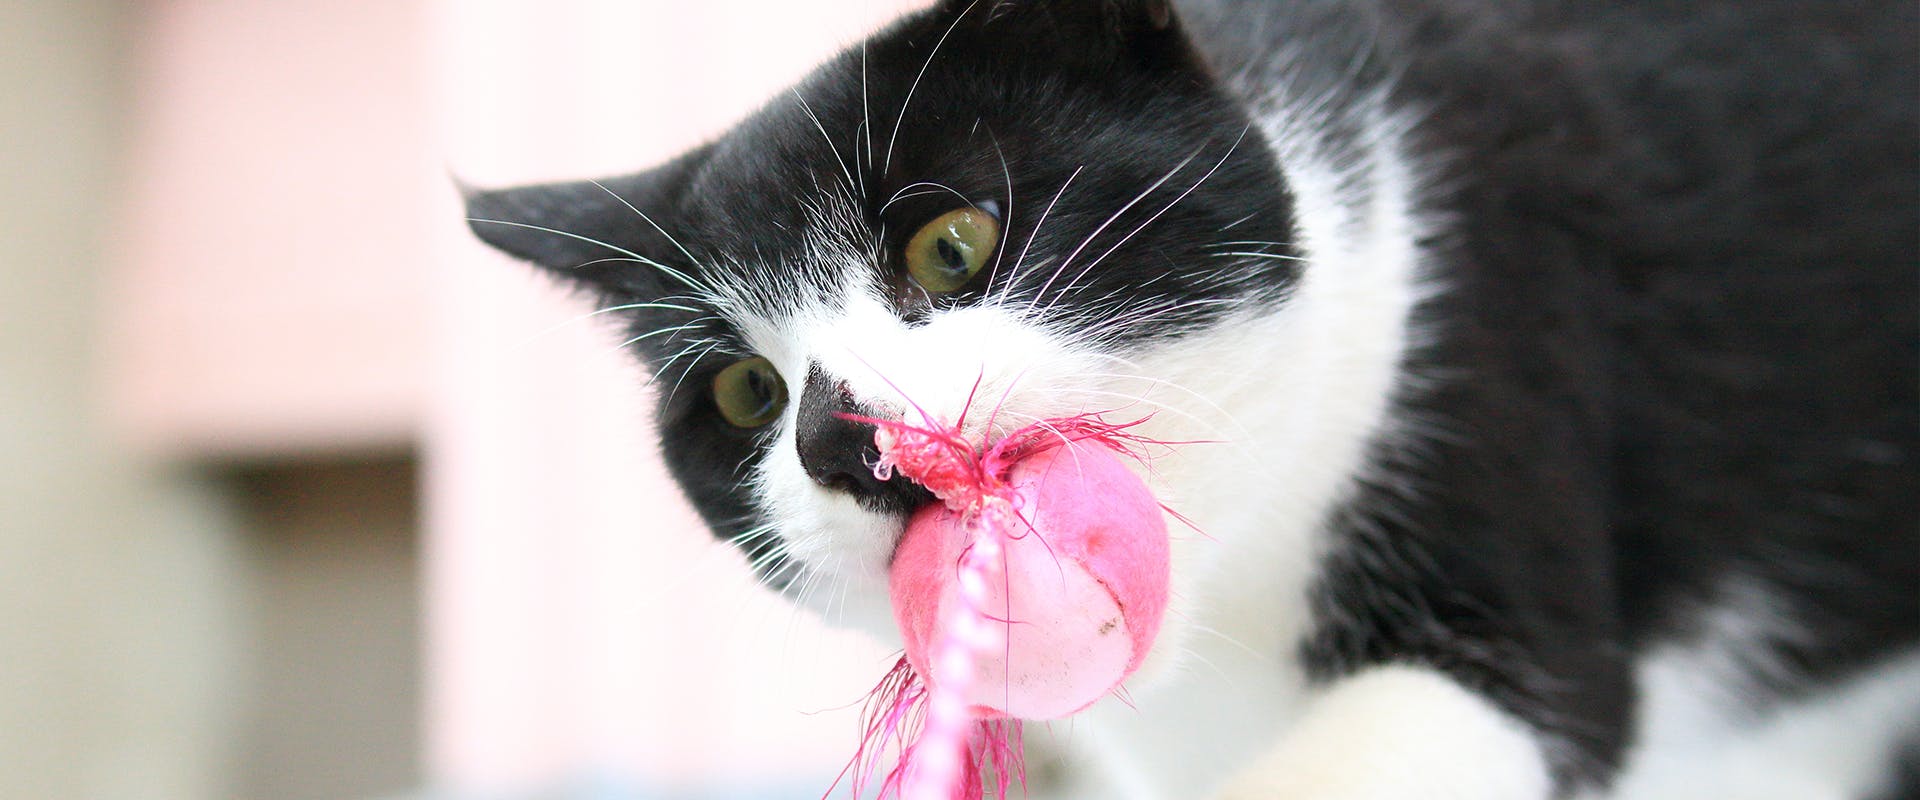 A black and white cat playing, a bright pink cat toy in its mouth